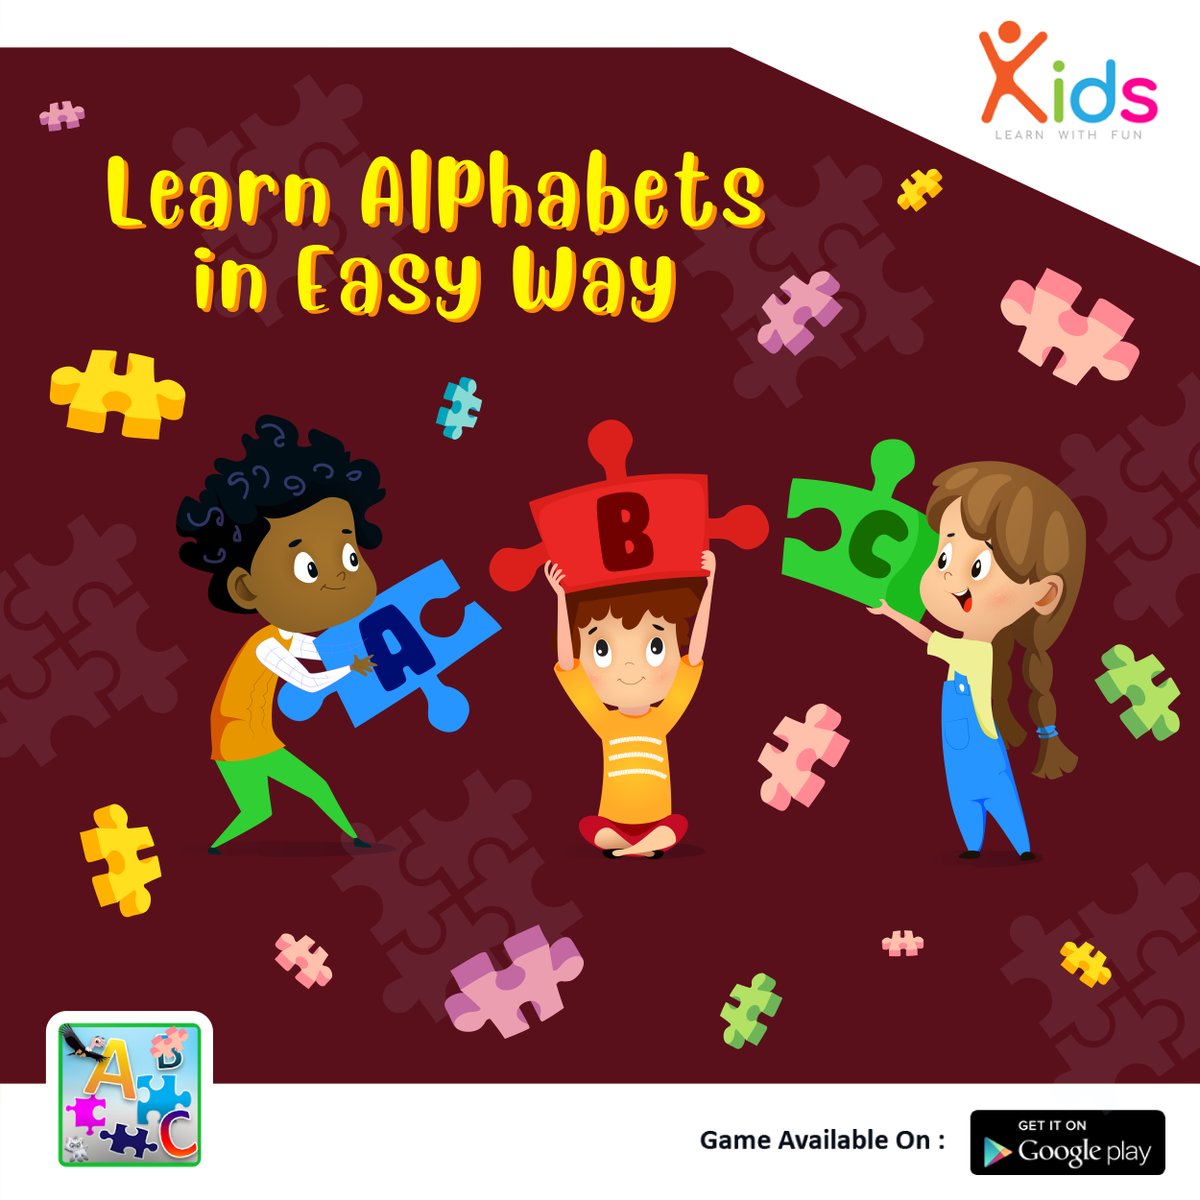 Do you want your #preschooler to learn and have fun at the same time? If yes, then check our #ABCJigsawPuzzlegame. Kids love #Jigsawgame - #edutainment (#education + #entertainment). It’s also improved their #MotorSkills. #KidsLearnWithFun
play.google.com/store/apps/det…